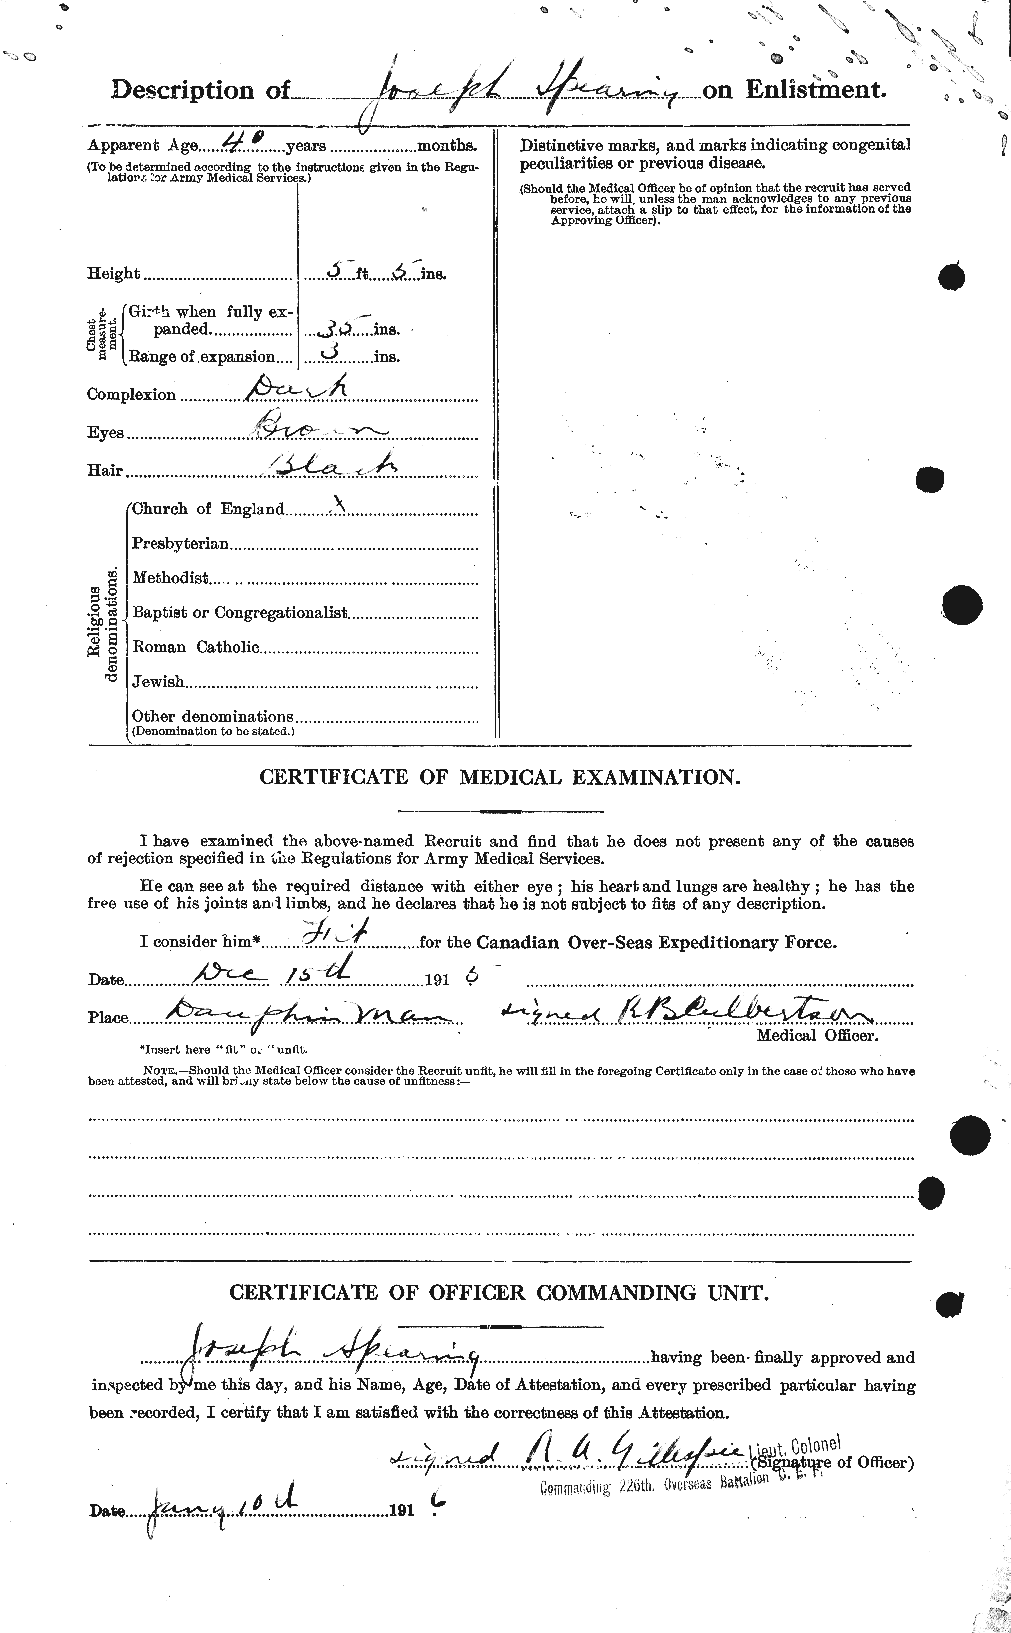 Personnel Records of the First World War - CEF 110687b